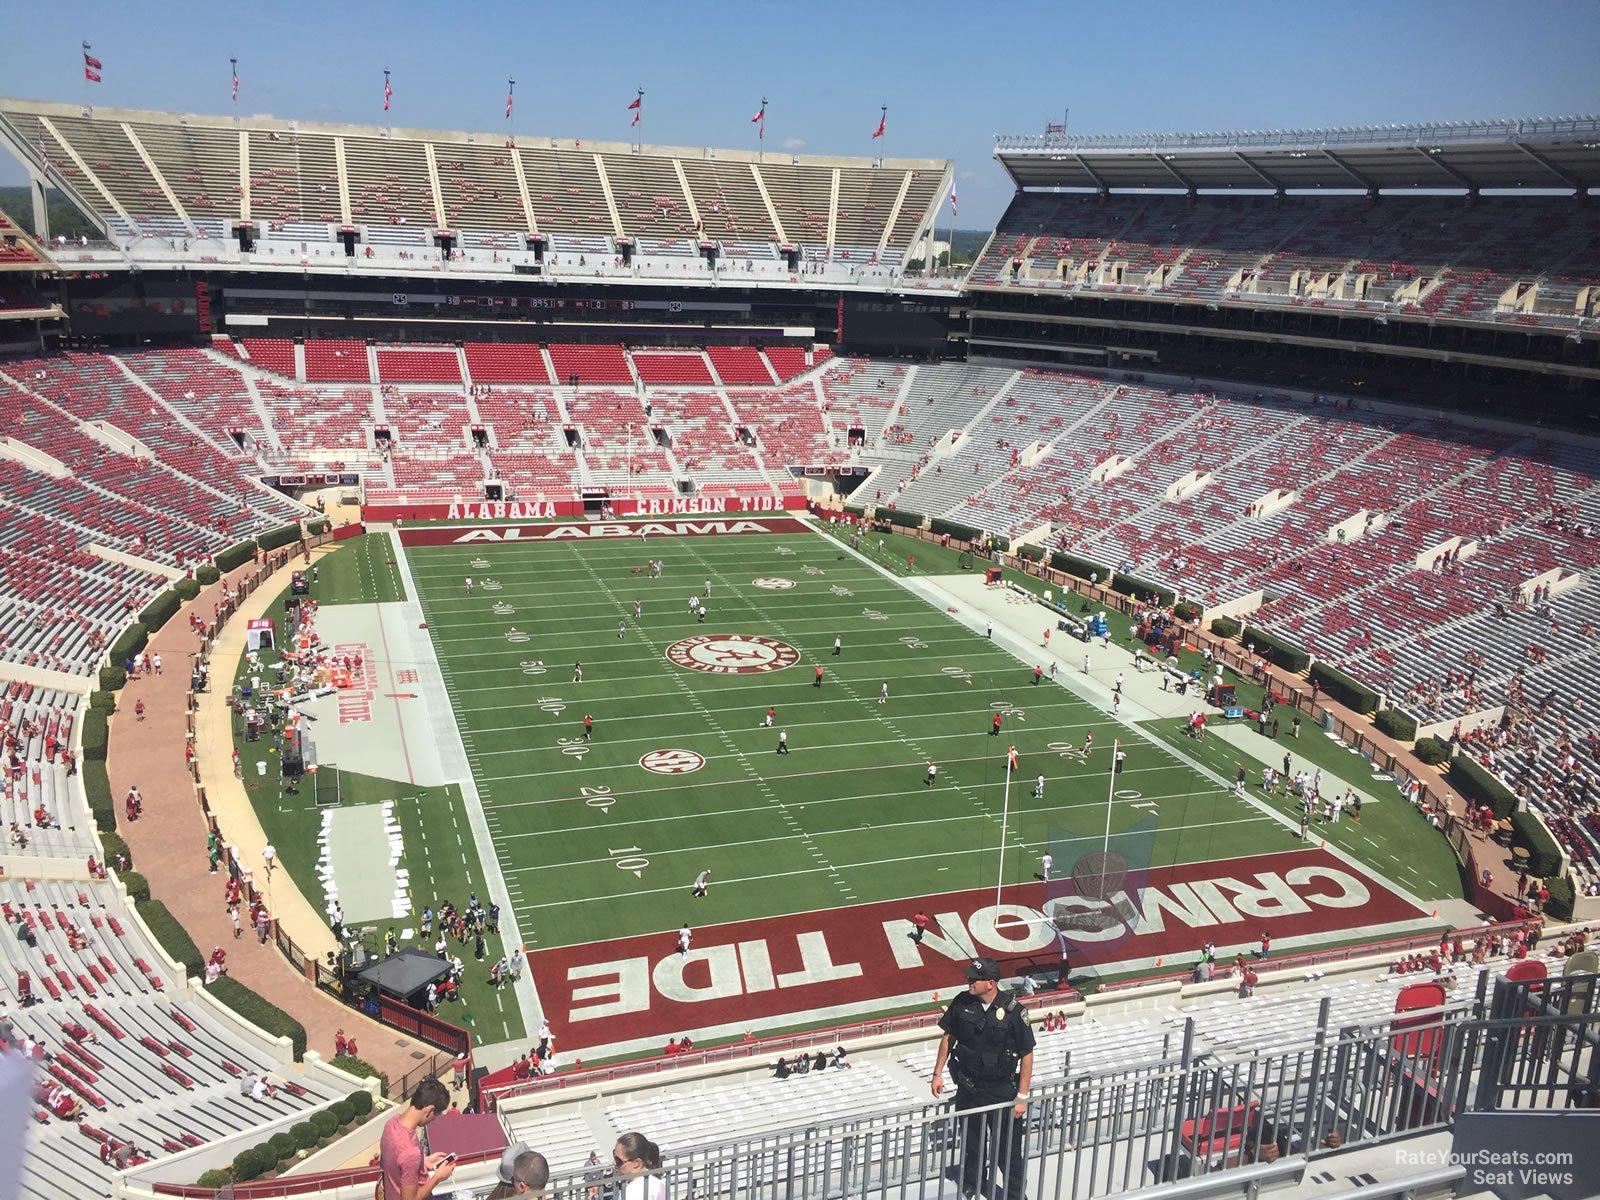 section ss10, row 10 seat view  - bryant-denny stadium